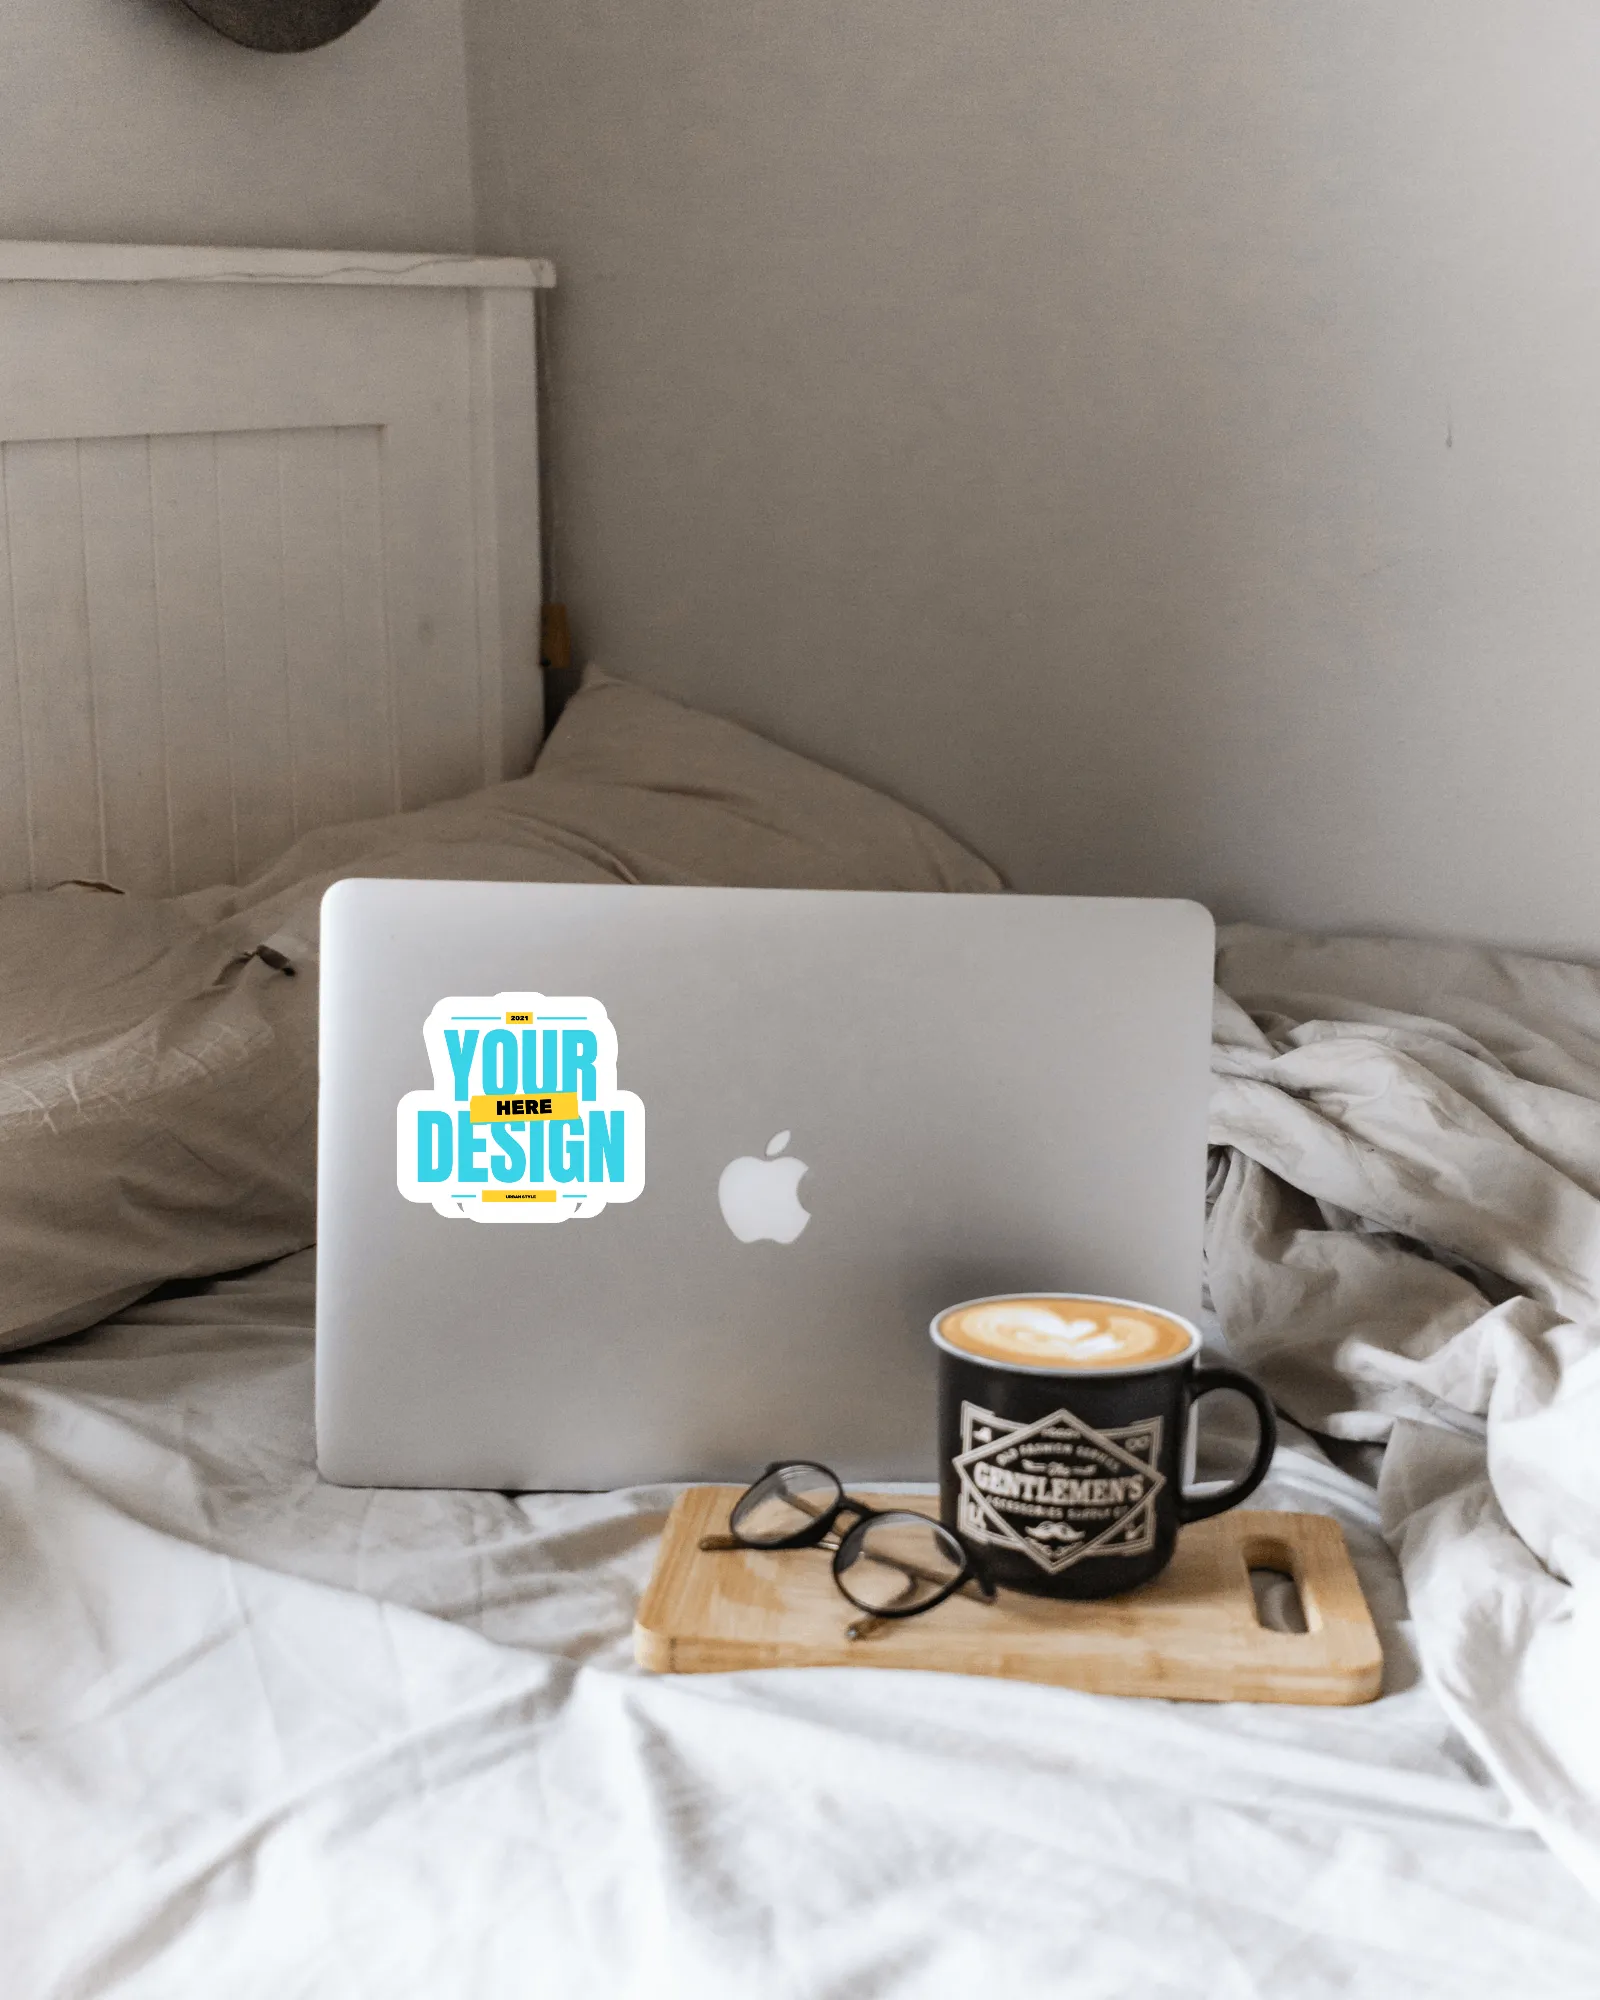 sticker mockup on a macbook with coffee cup and glasses on bed